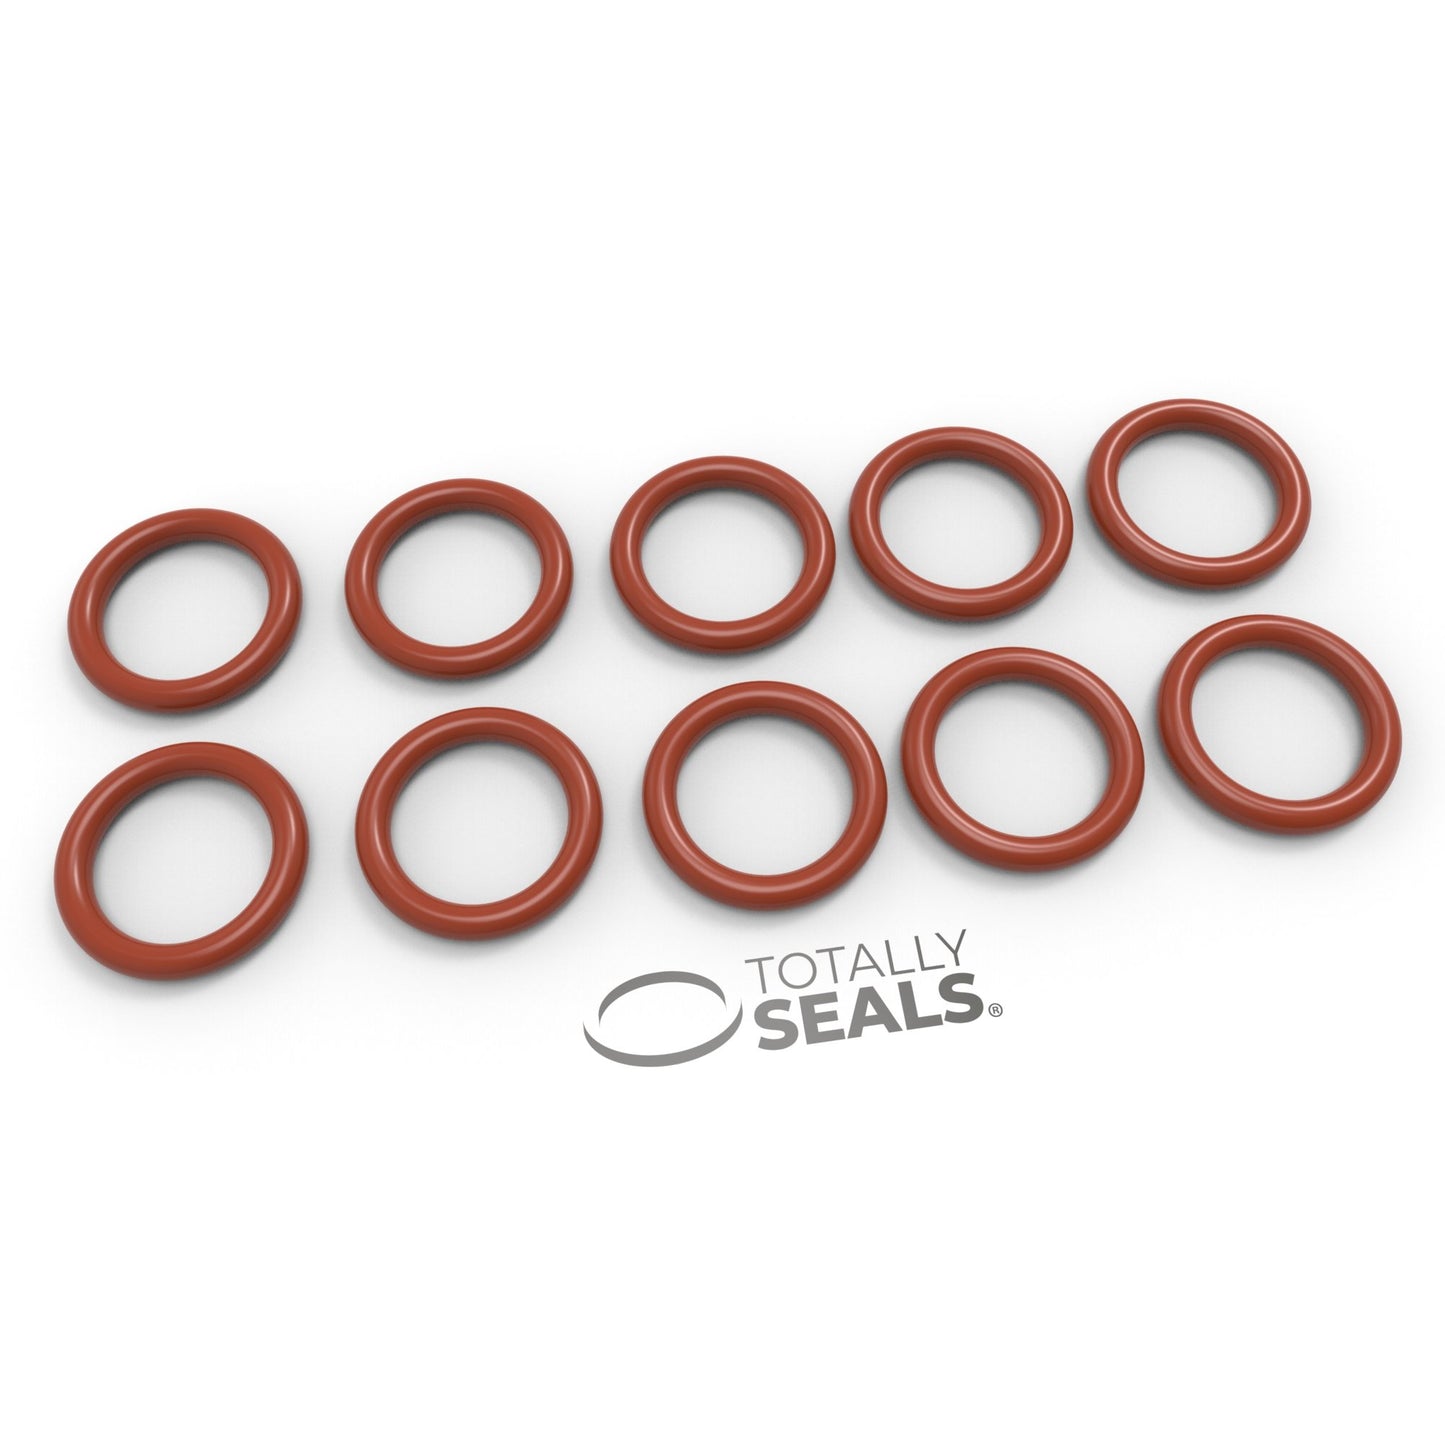 18mm x 2mm (22mm OD) Silicone O-Rings - Totally Seals®